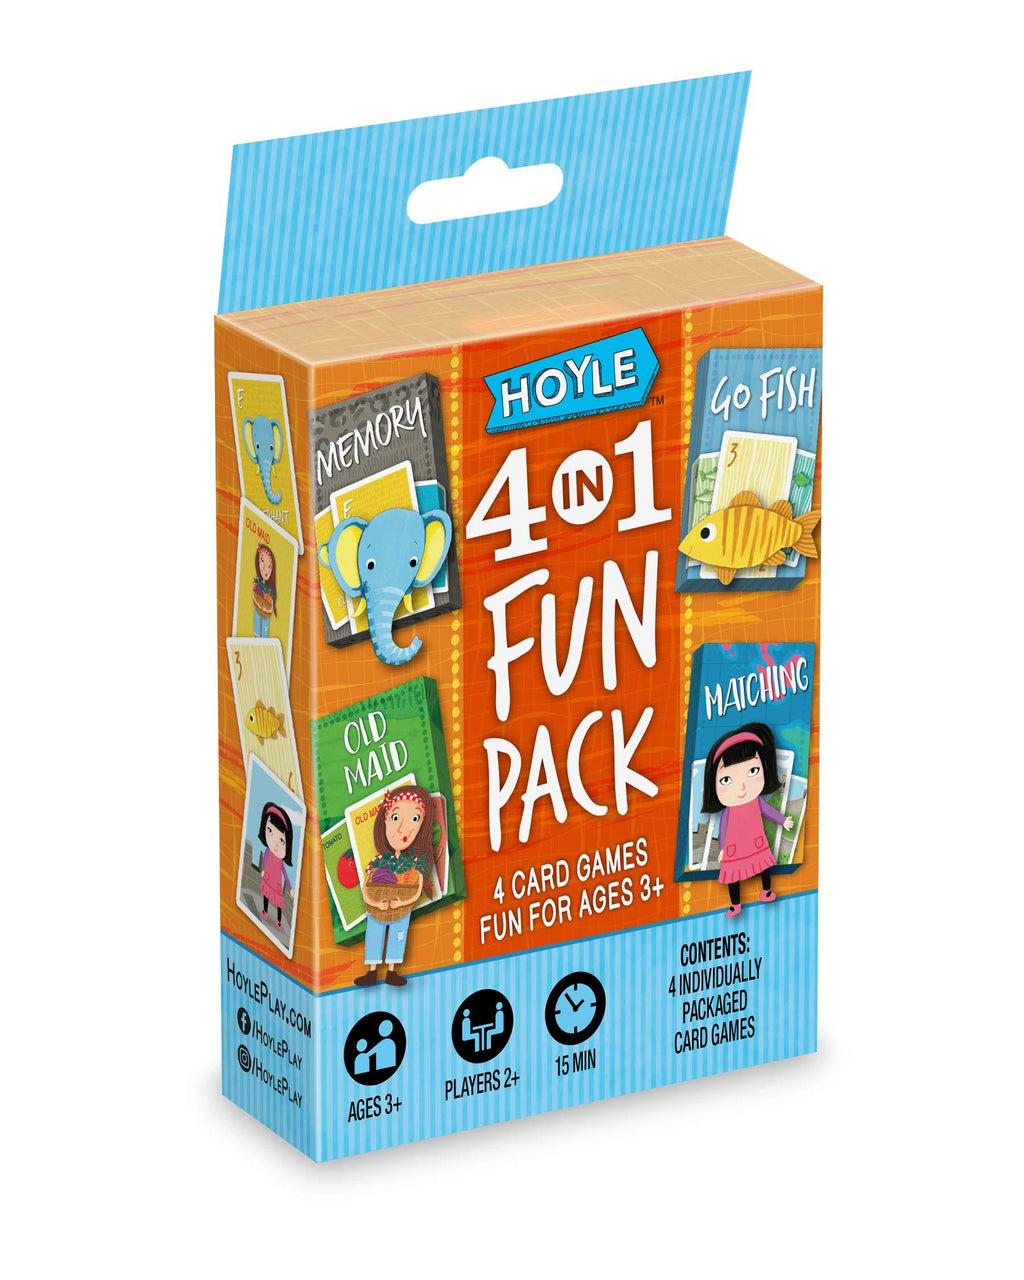 Hoyle 6 in 1 Fun Pack - Kids Card Games - Ages 3 & Up - Memory, Go Fish, Crazy Eights, Old Maid, Matching, Slap Jack Hoyle 4 in 1 Fun Pack - BeesActive Australia